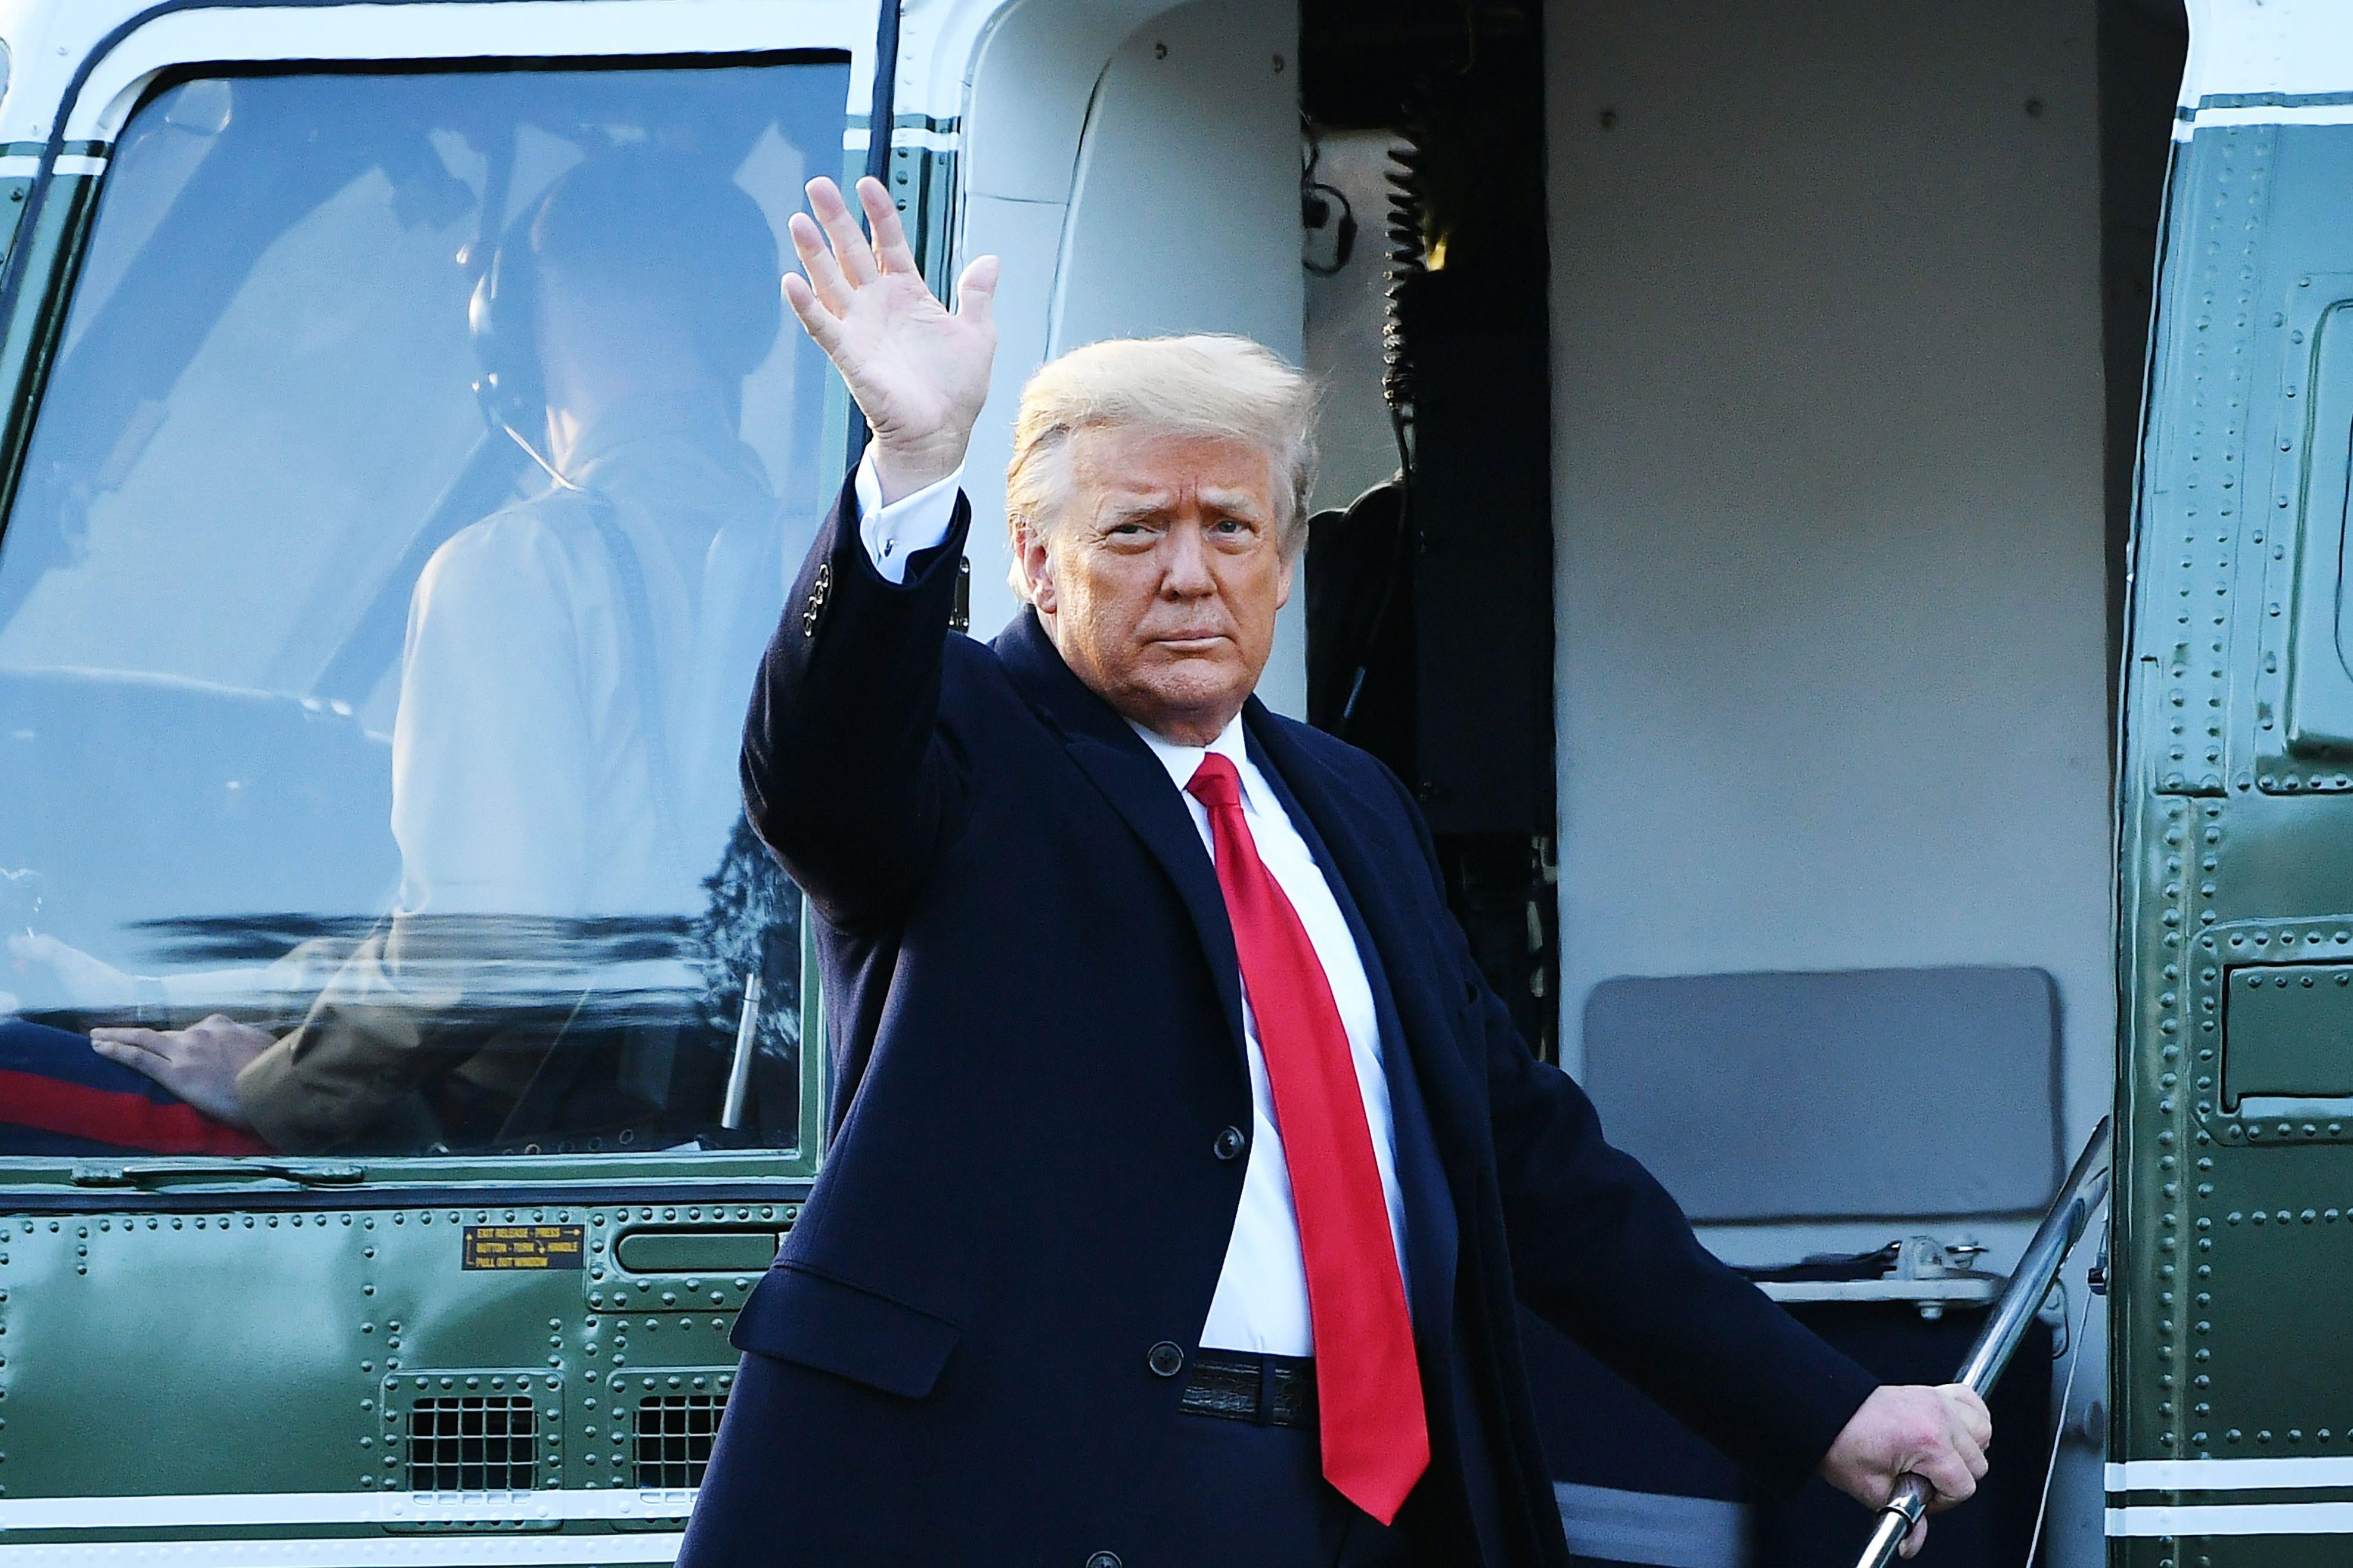 Trump waves as he boards Marine One at the White House for the final time.